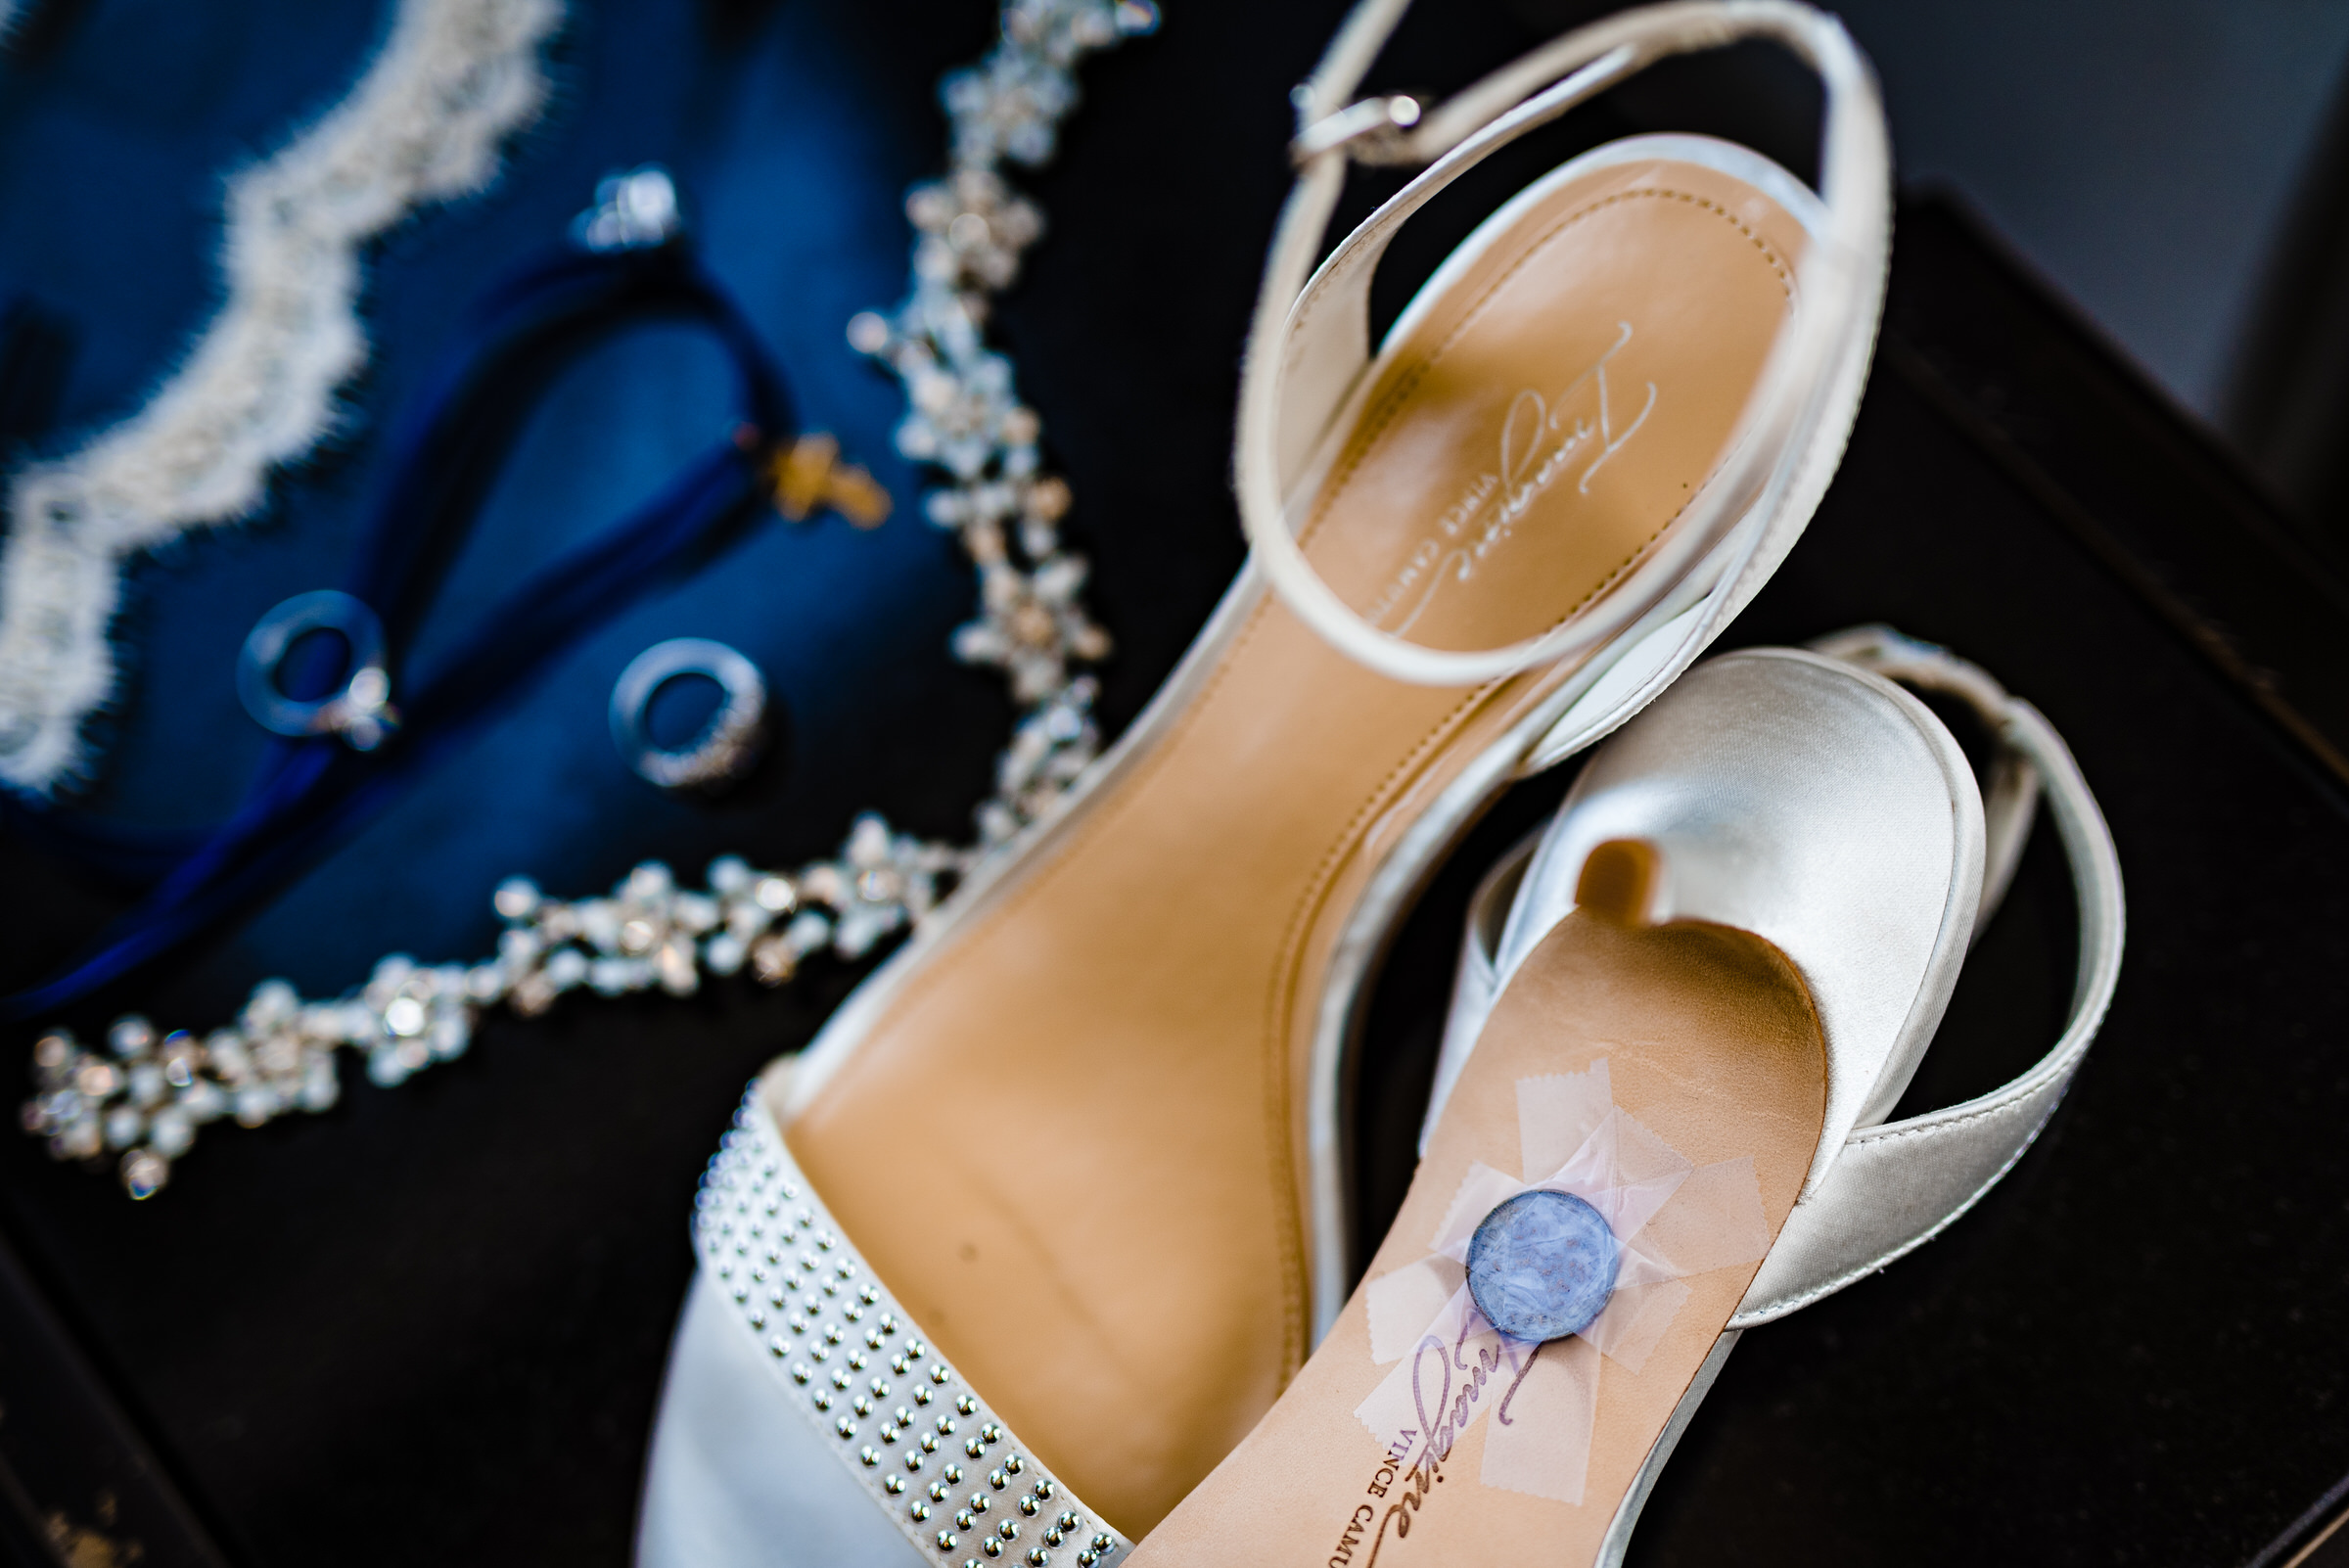 Photograph of a bride's wedding details including a sixpence taped to the bottom of one of her shoes